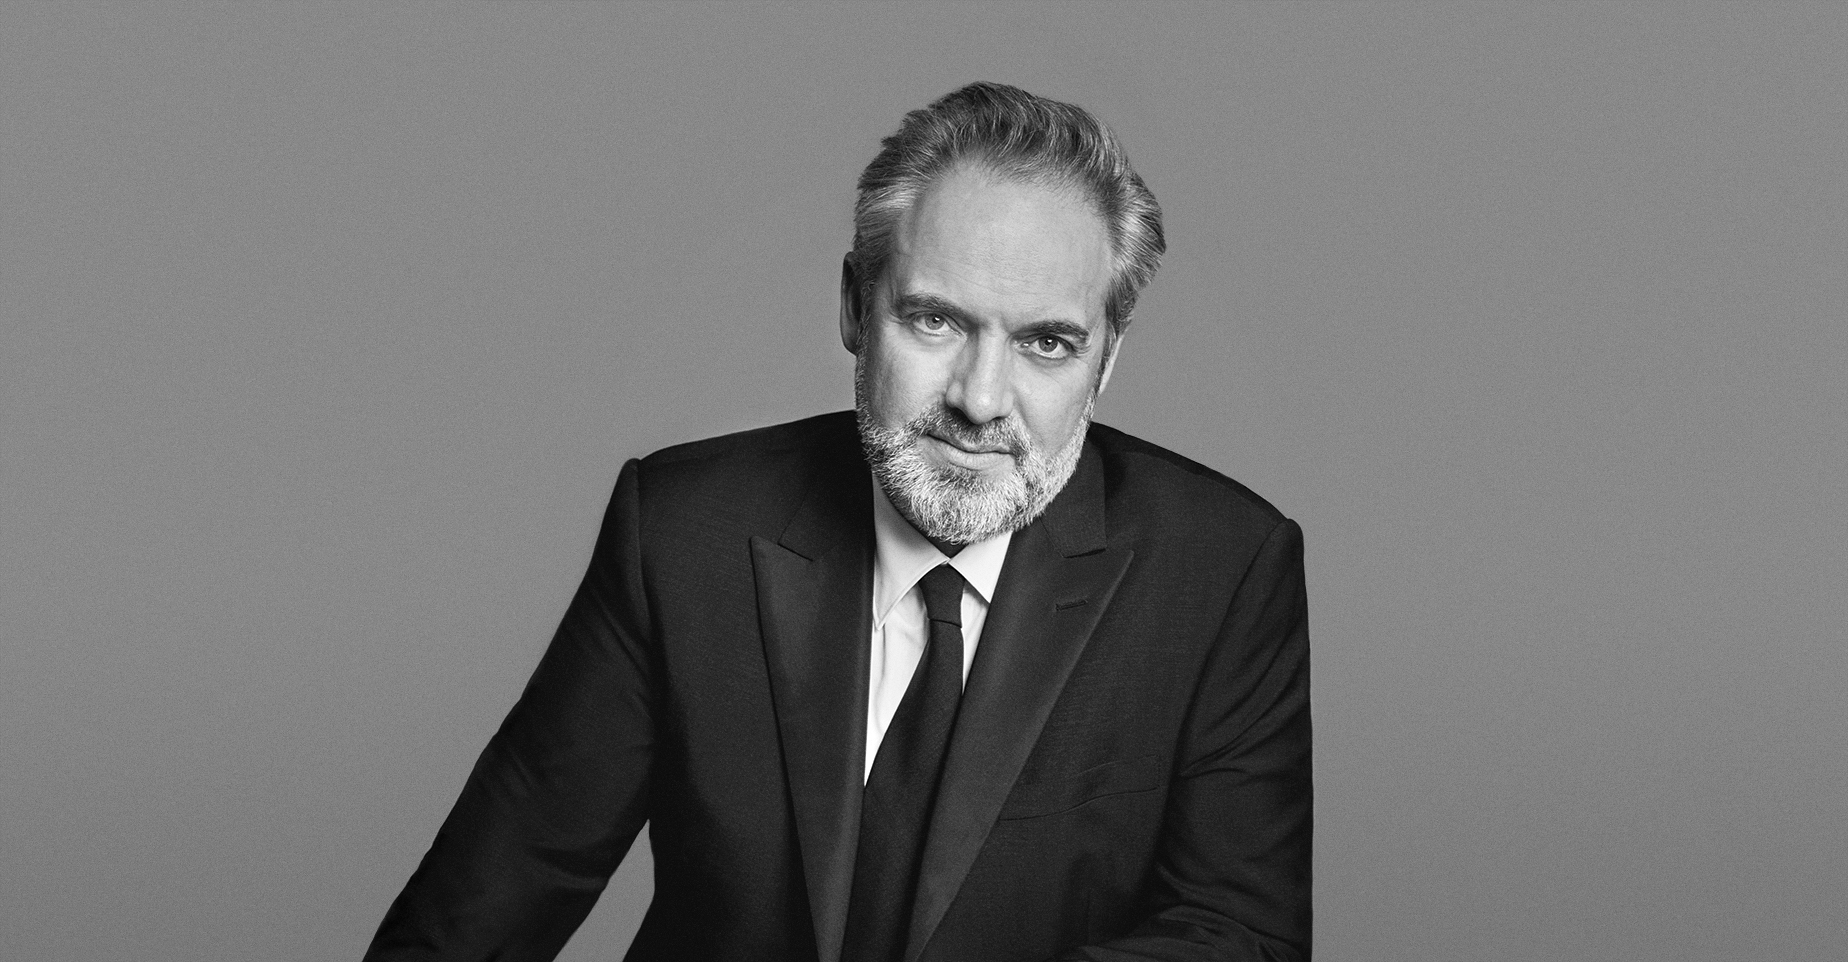  Happy birthday, Sam Mendes!

What is the best film Mendes has directed? 